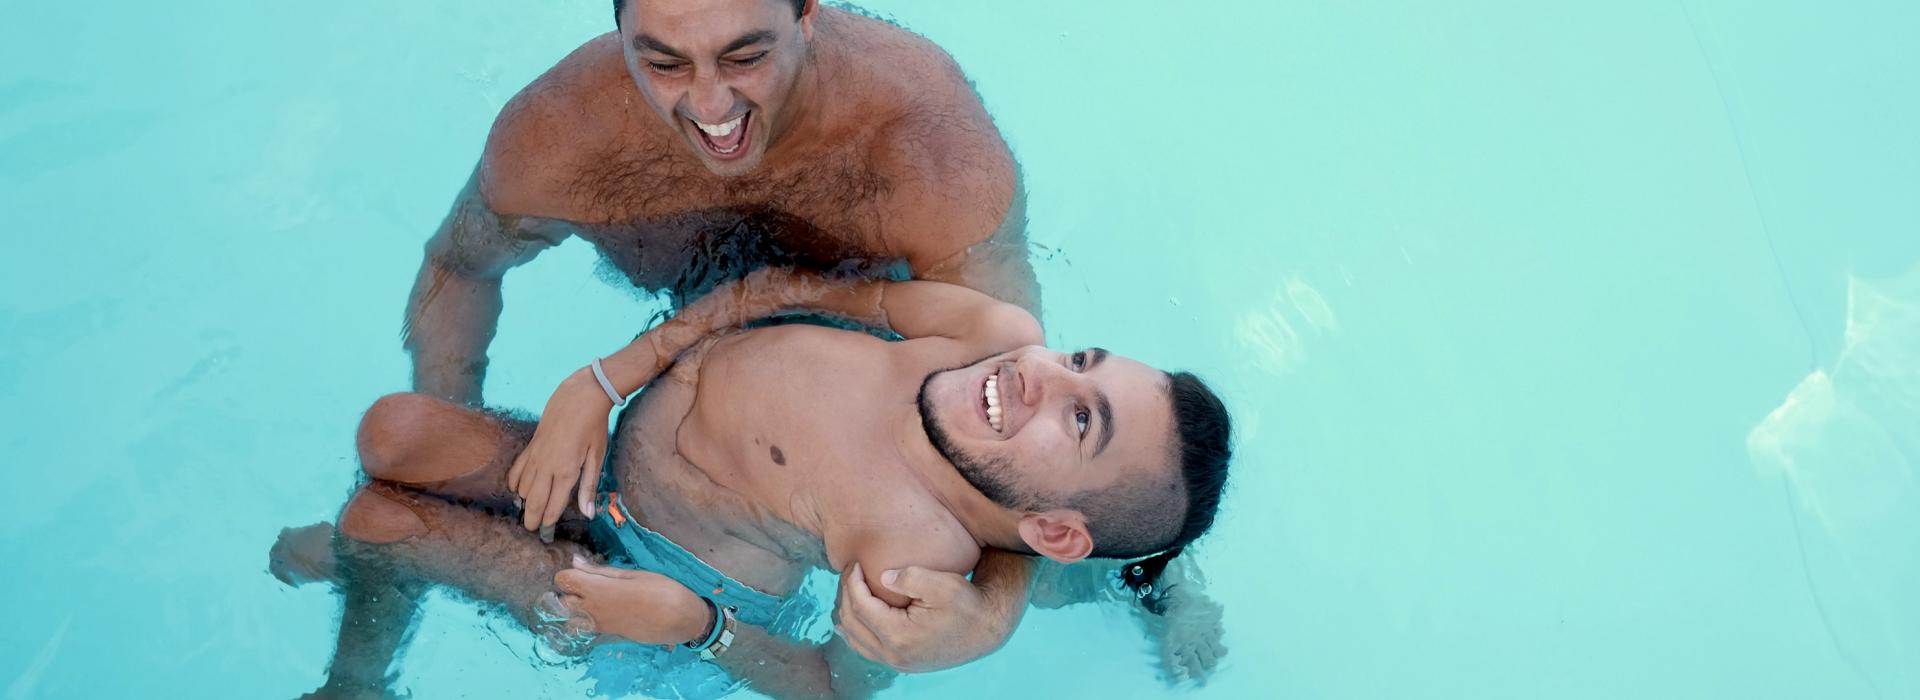 Cover. 35 years old man and 20 years old disabled man laughing in a swimming pool.